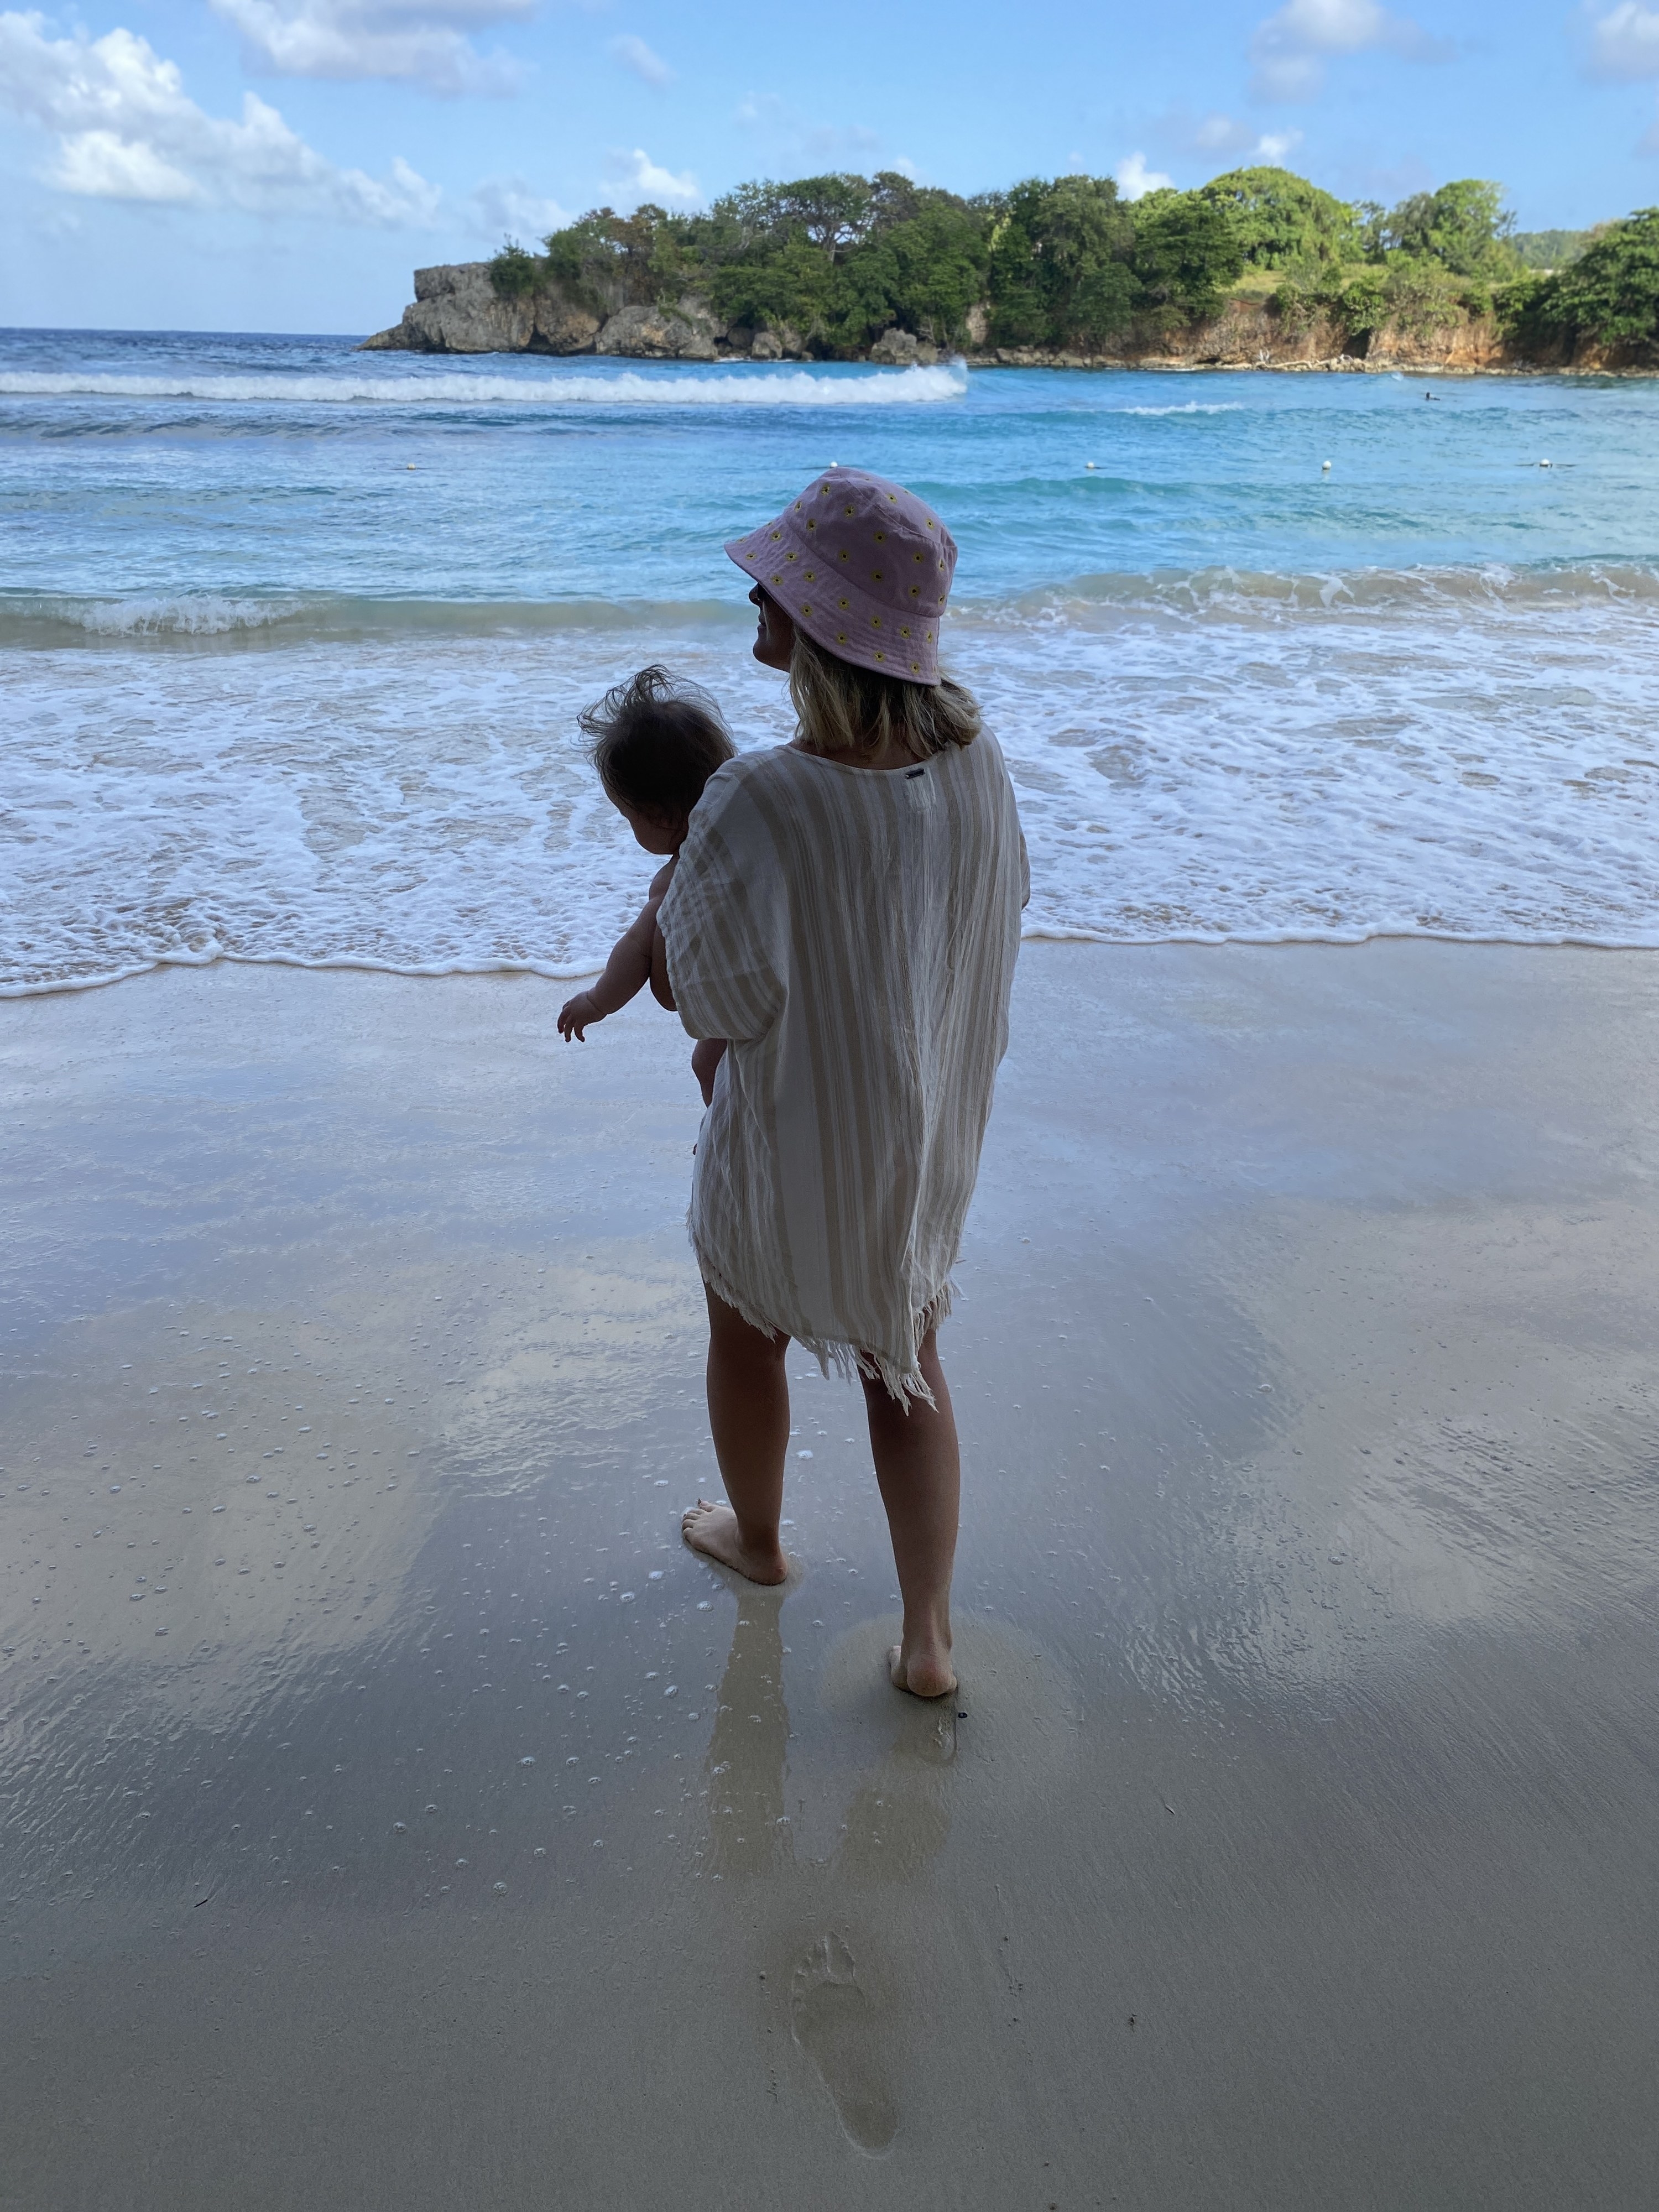 Woman walking on the beach with a baby